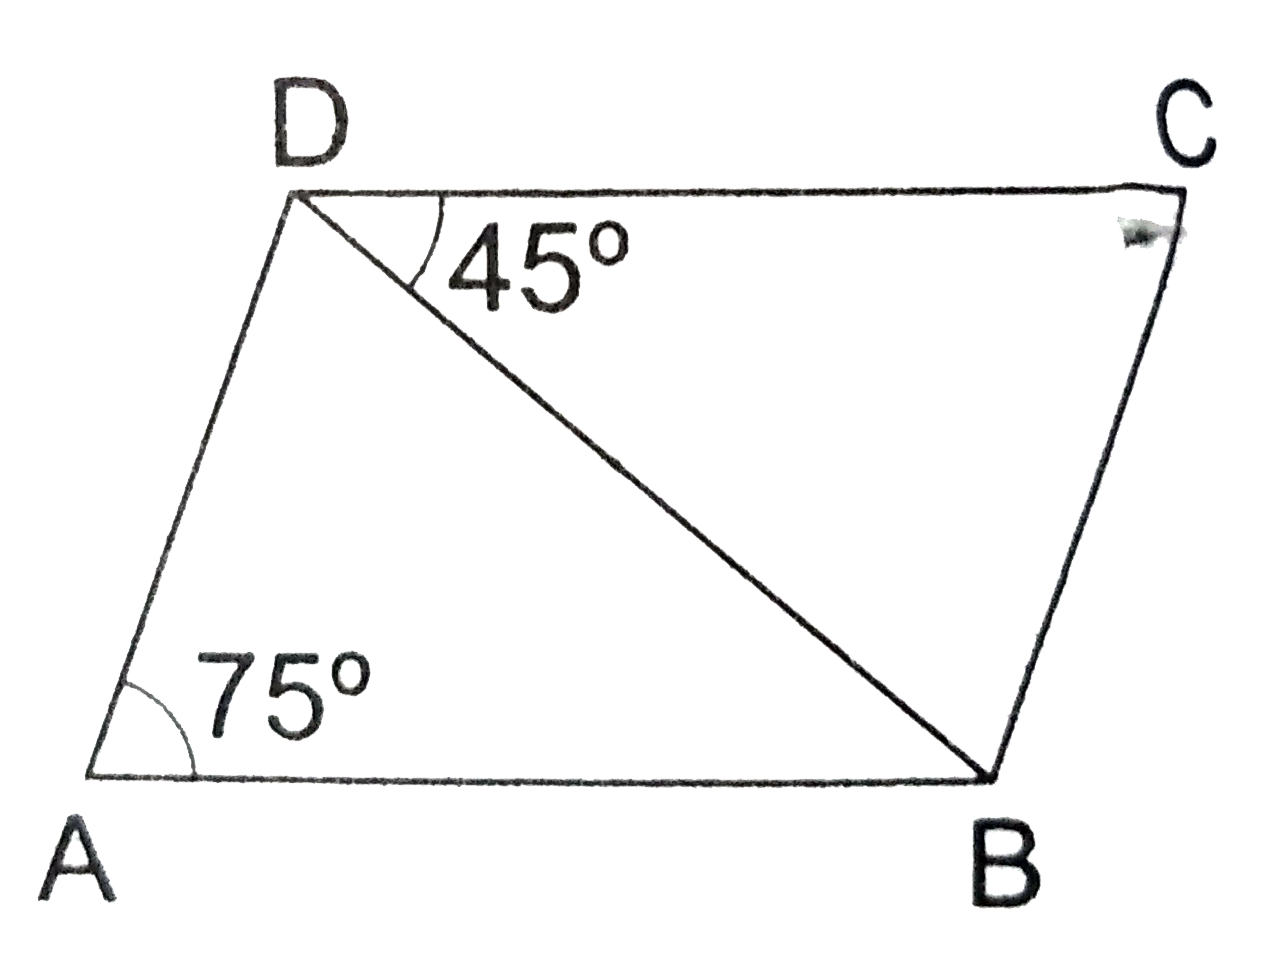 In the given figure, ABCD is a parallelogram in which angle BDC =45^(@) and angle BAD=75^(@).